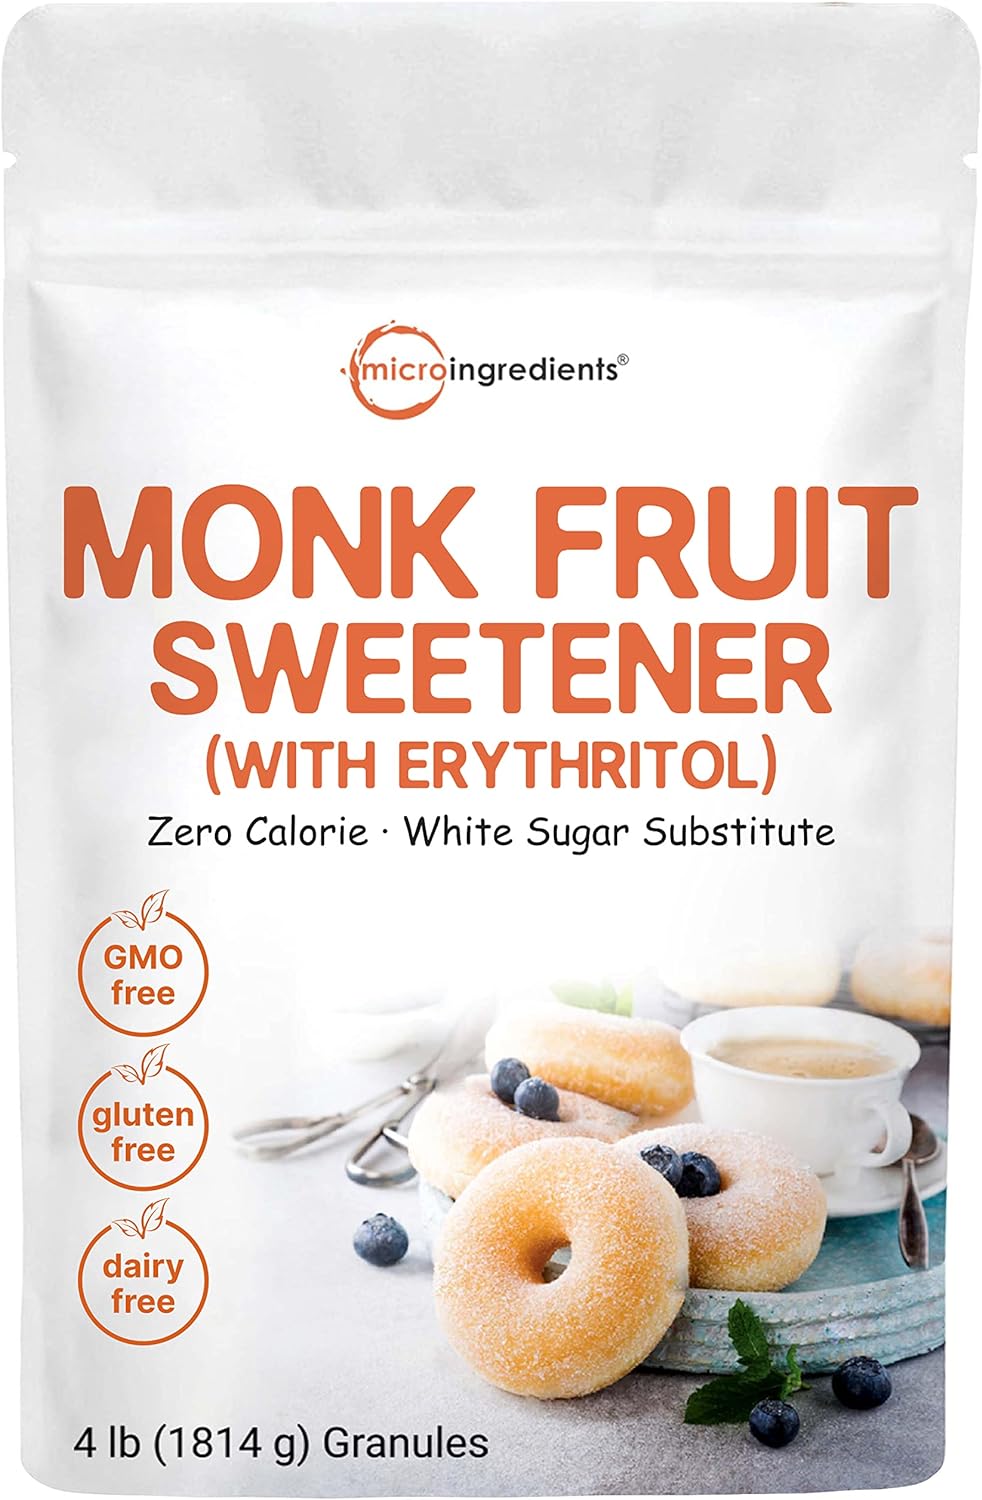 Monk Fruit Sweetener with Erythritol Granules, 4 Pounds, No After Taste, 1:1 White Sugar Substitute, Keto Diet Friendly, Zero Calorie, Natural Sweetener for Drinks, Coffee, Tea, Cookies, No-GMO, Vegan